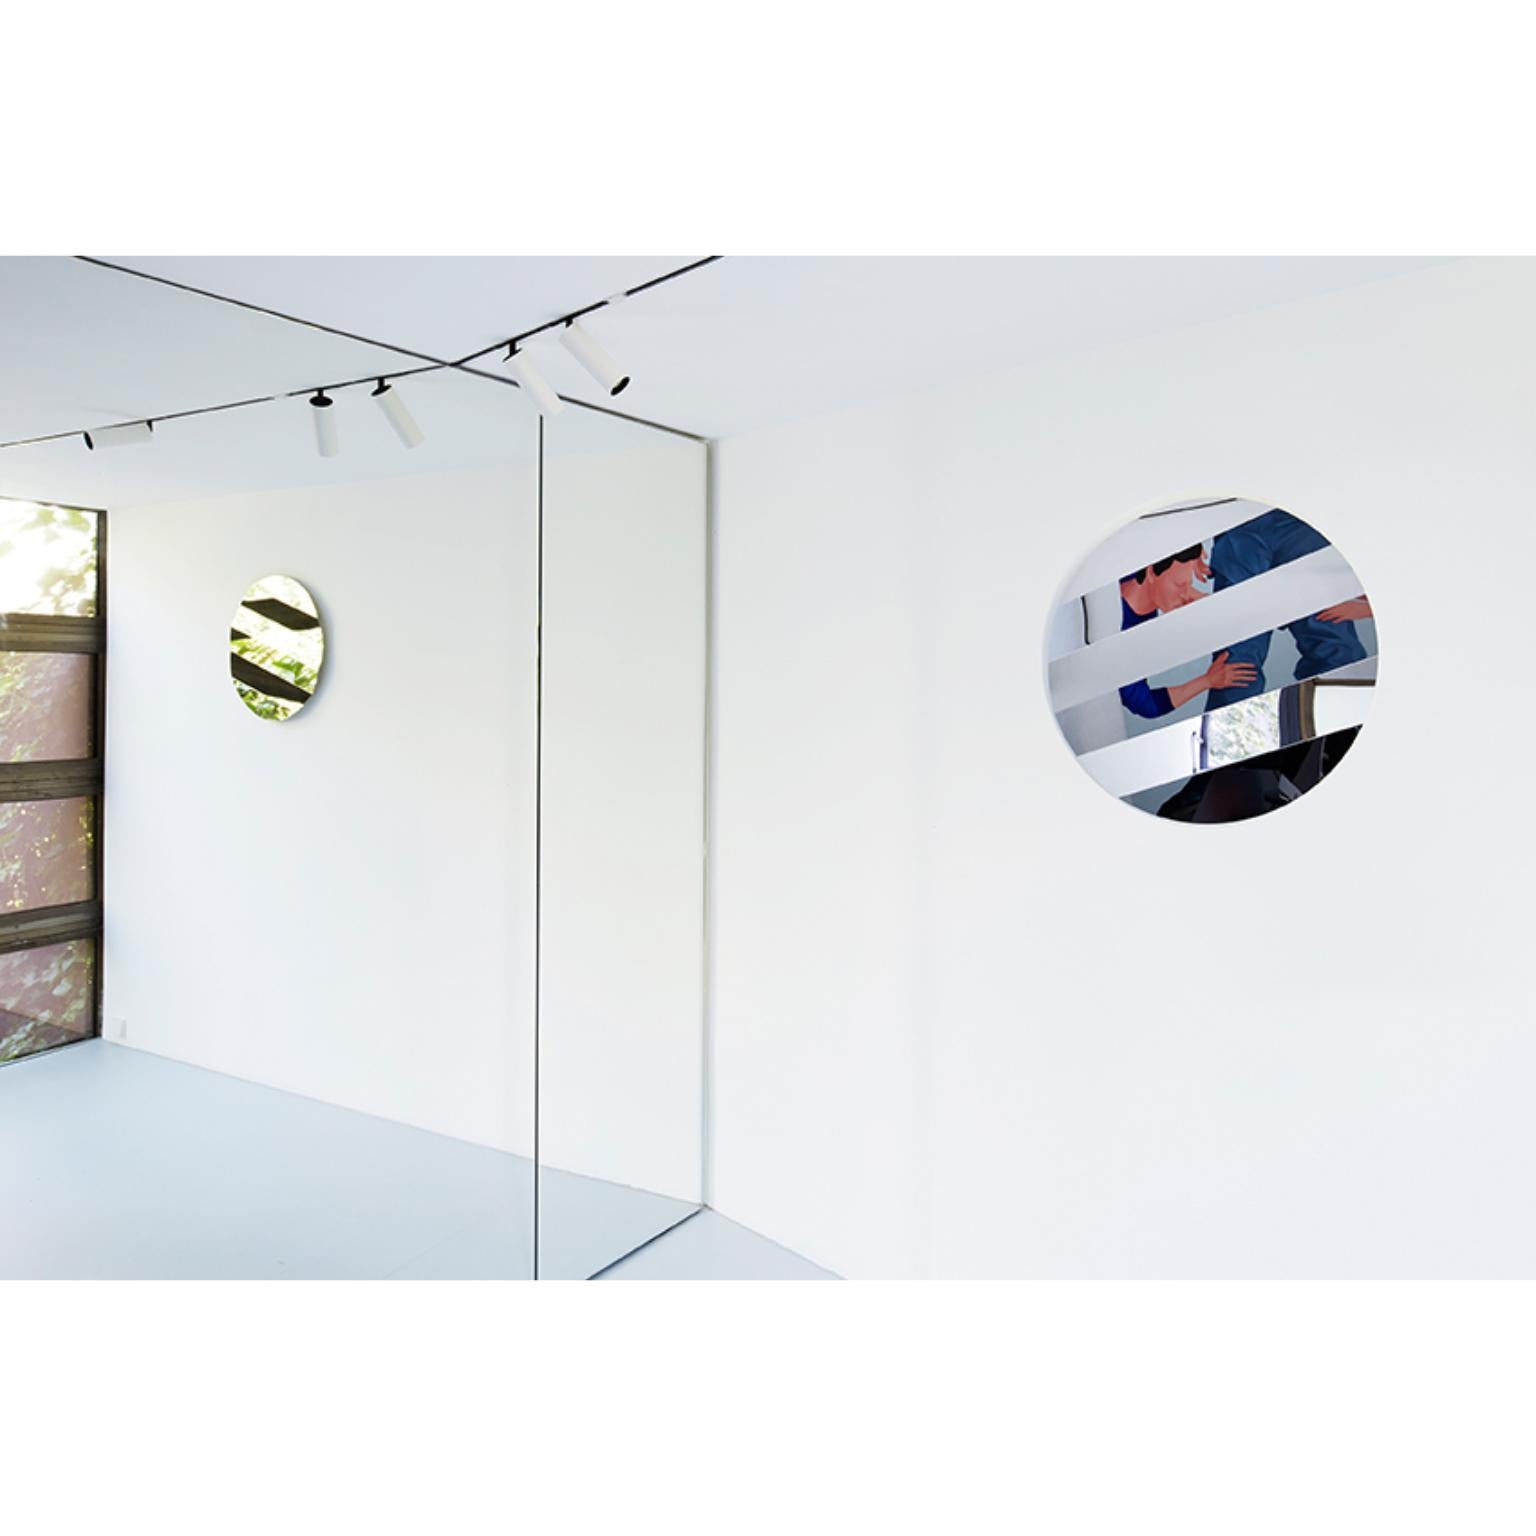 Stripe Mirror 120 Circle by Sebastian Scherer.
Dimensions: ø : 120. 
Materials: Mirror Stainless Steel, Wooden Bracket
Different sizes are available. Square version available.

The STRIPE wall mirror creates a fascinating graphic effect: the